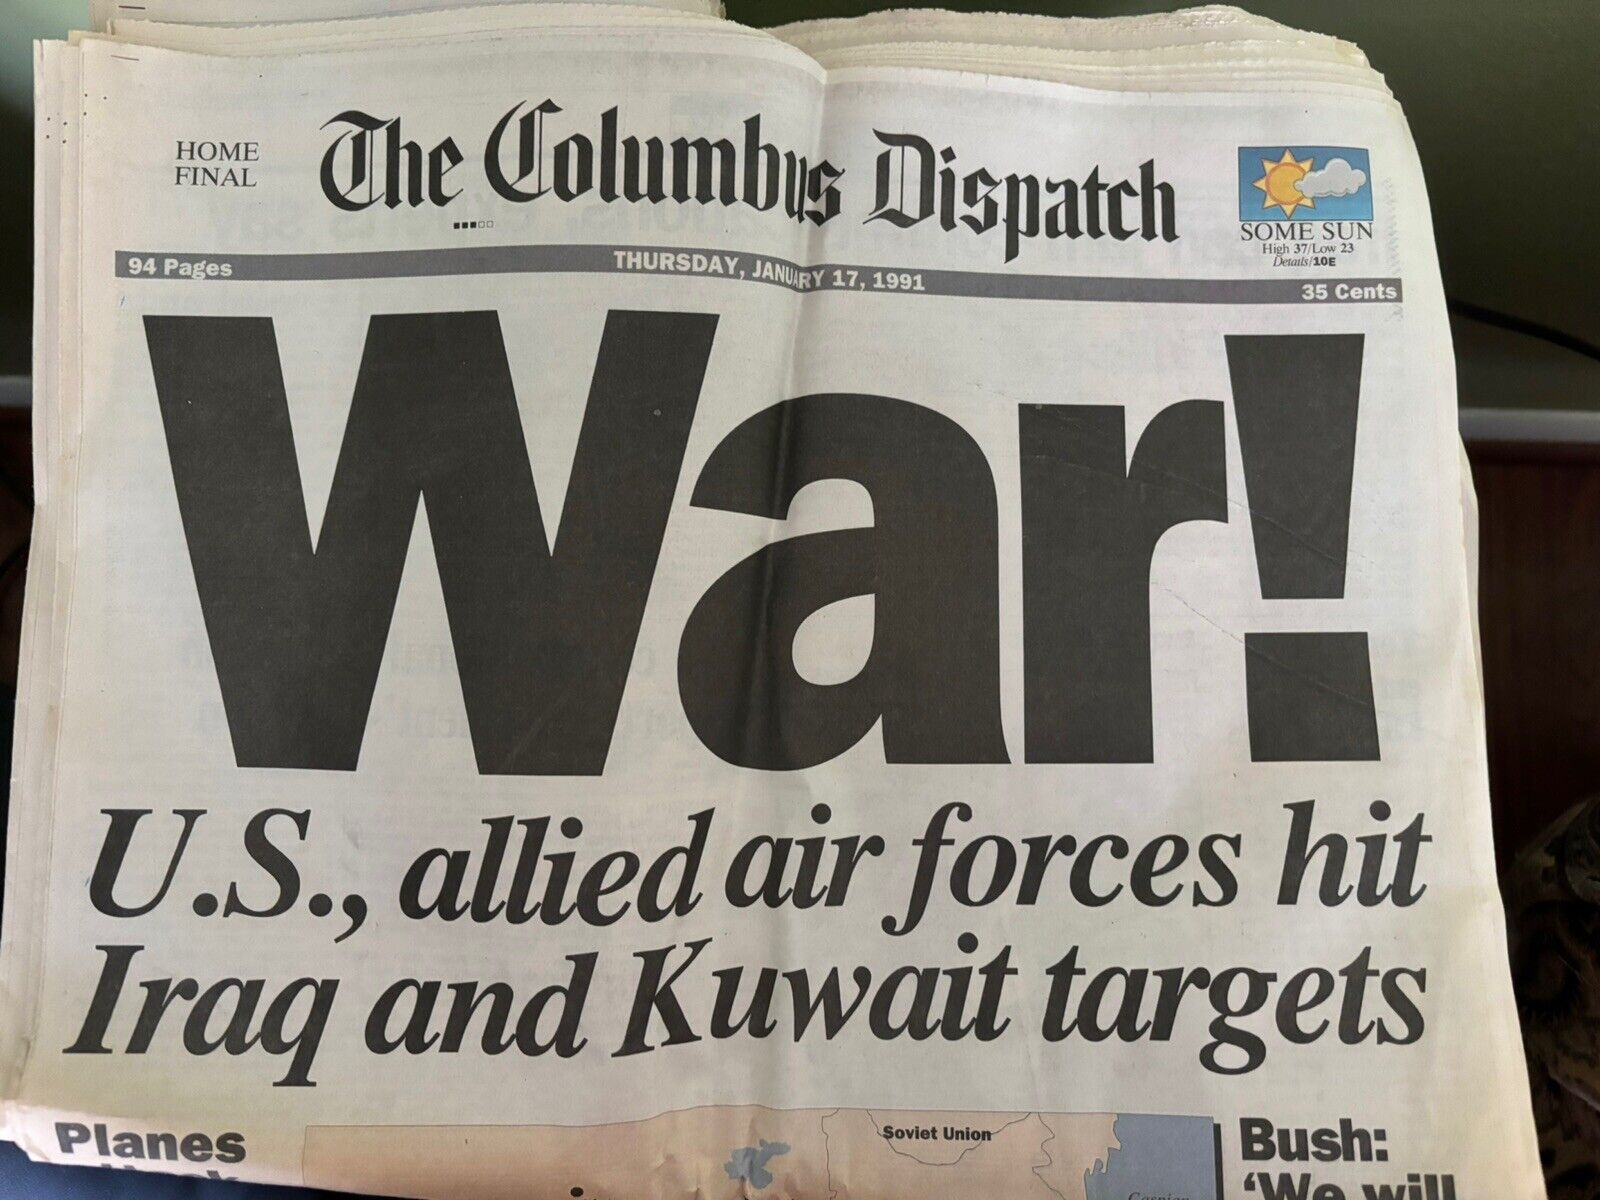 Vintage 1991 January 17 The Columbus Dispatch War US Allied Air Forces Hit Iraq